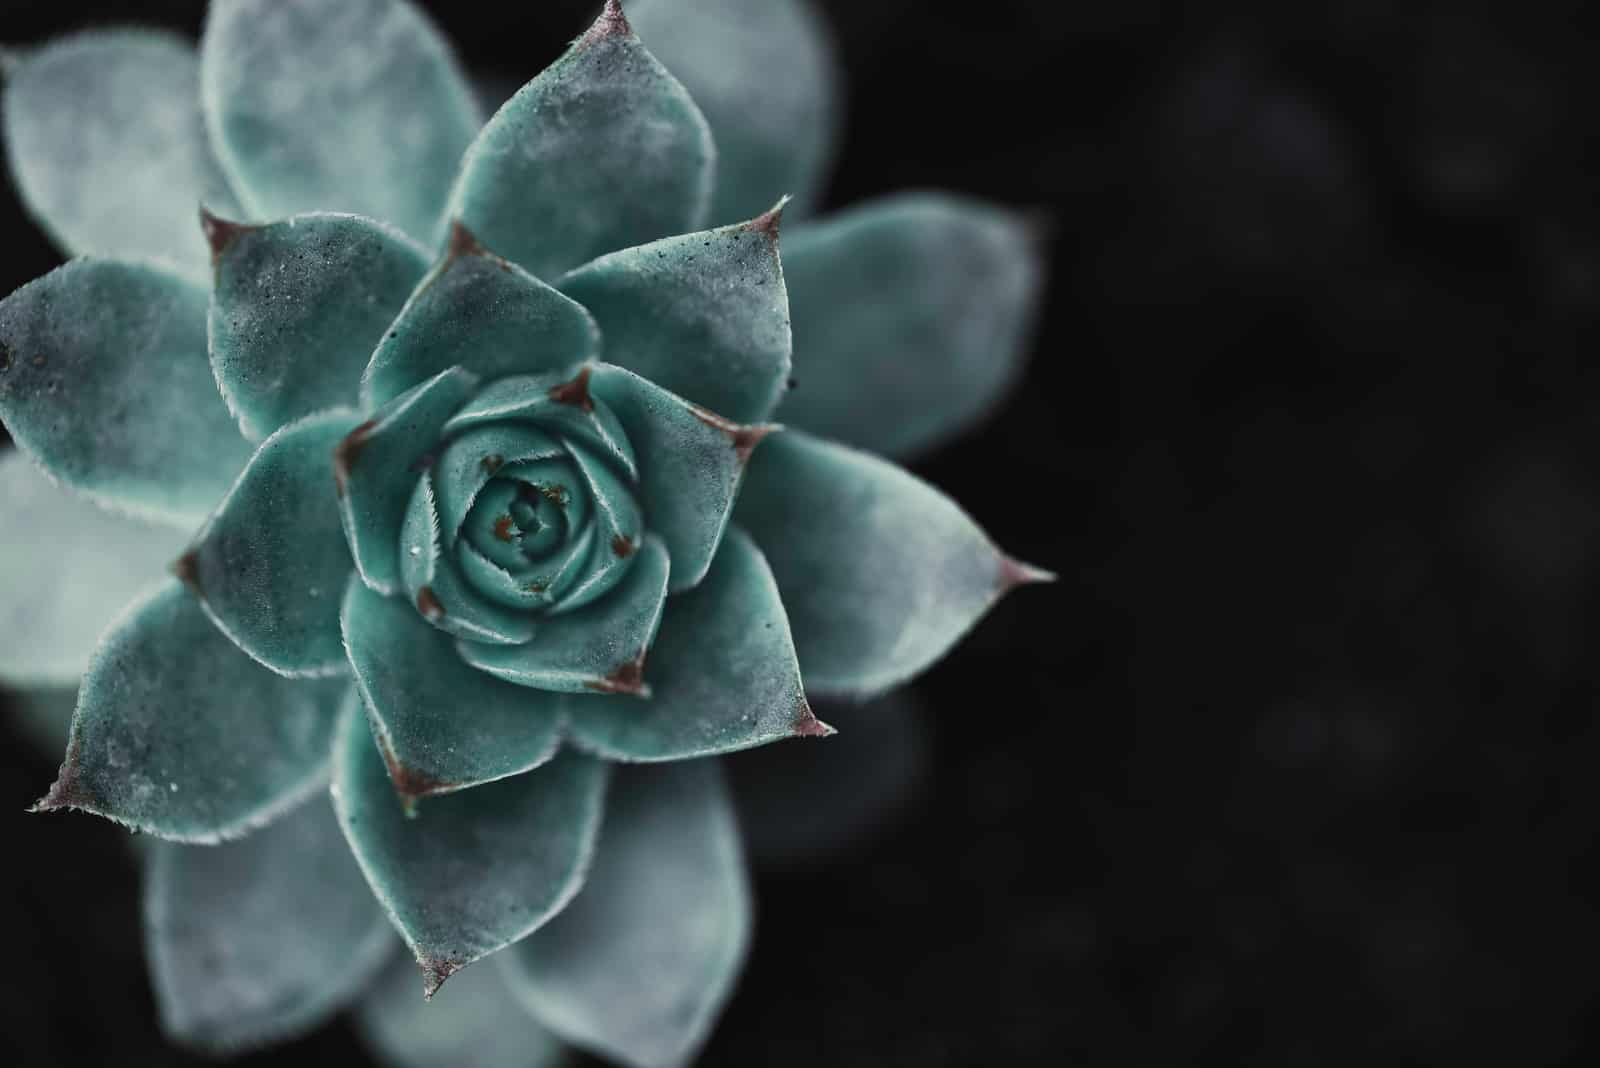 80 Succulent Quotes & Puns To Make Your Day